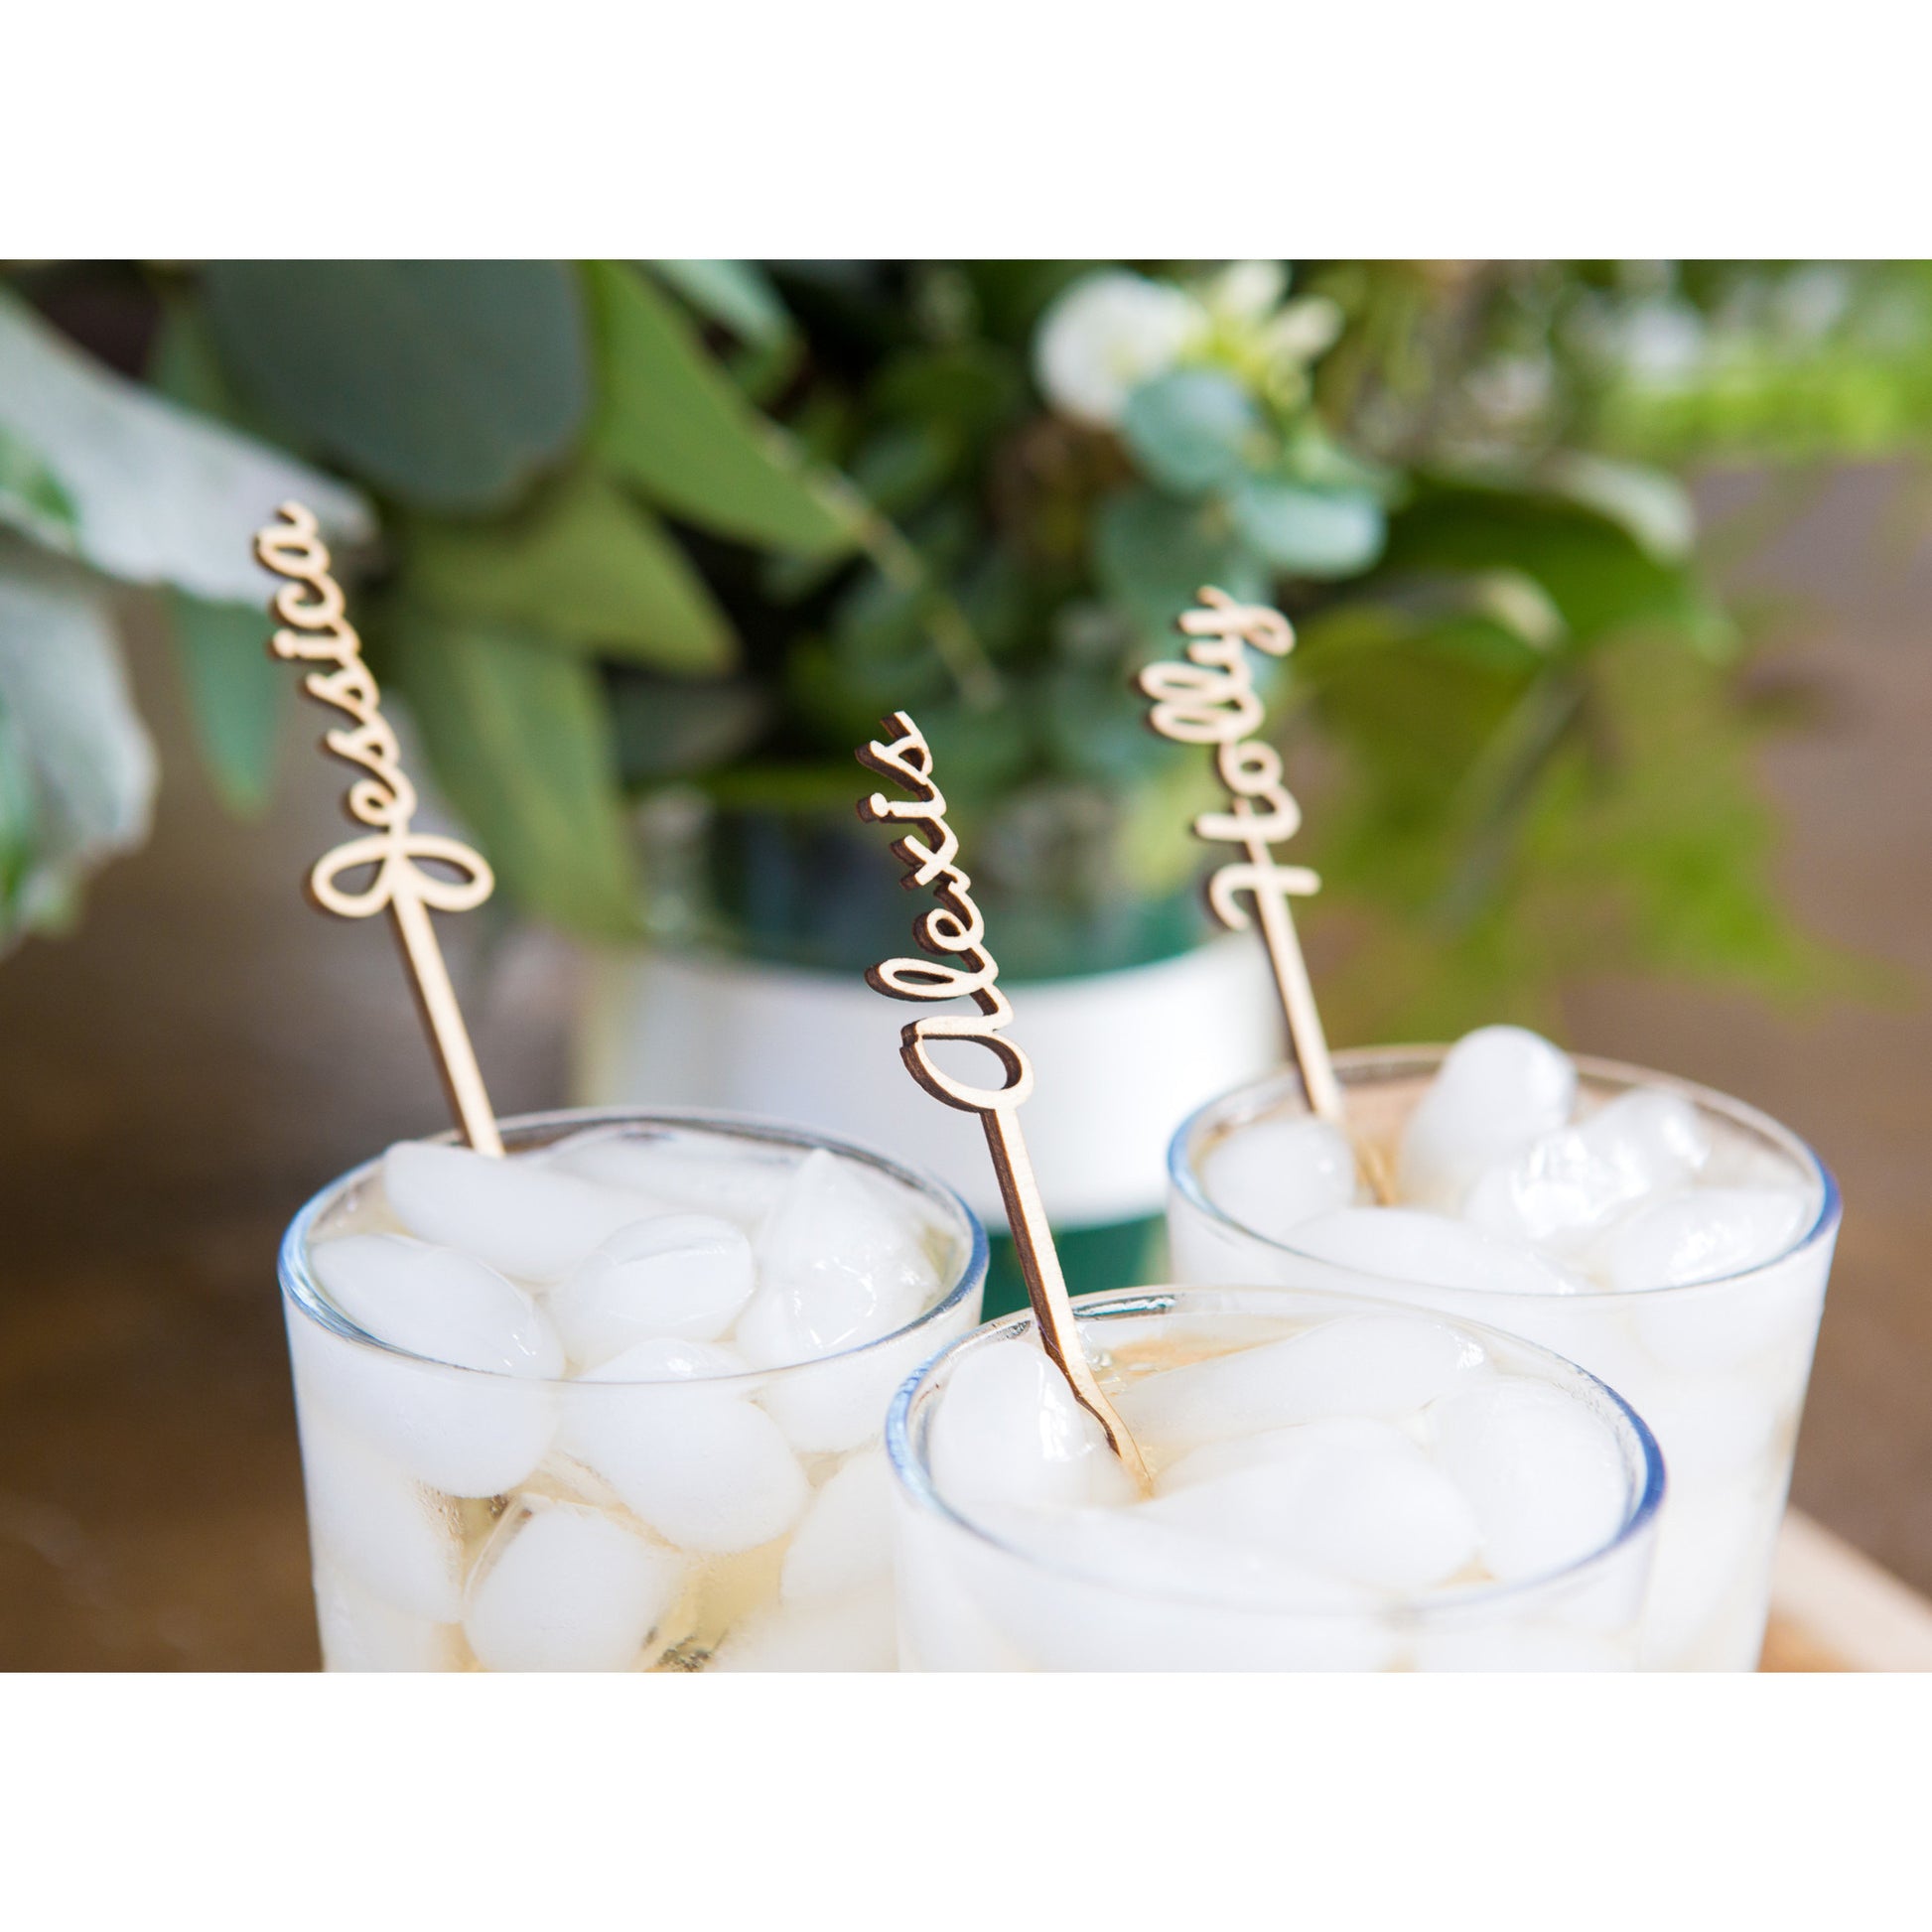 Personalized Name Drink Stirrers Cocktail Accessories Wedding